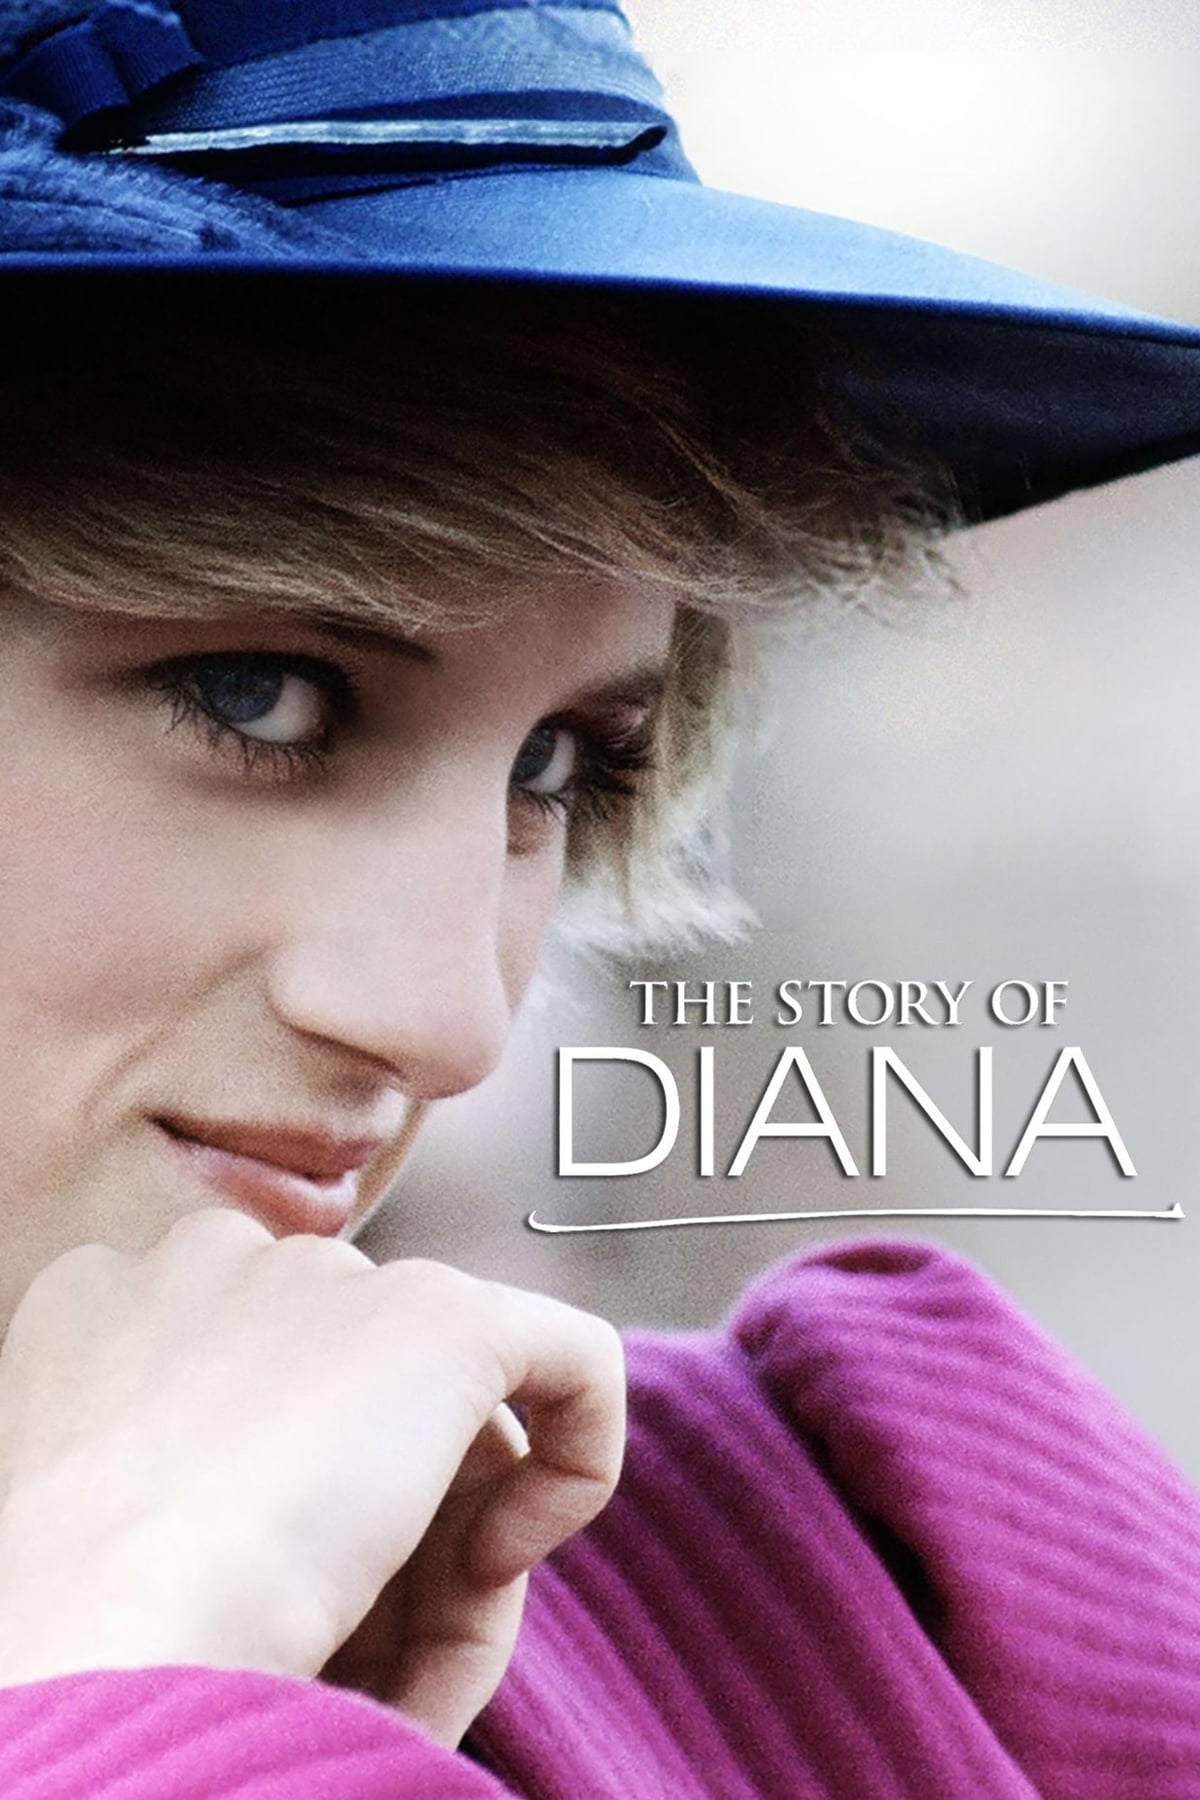 The Story of Diana TV Shows About Royal Family